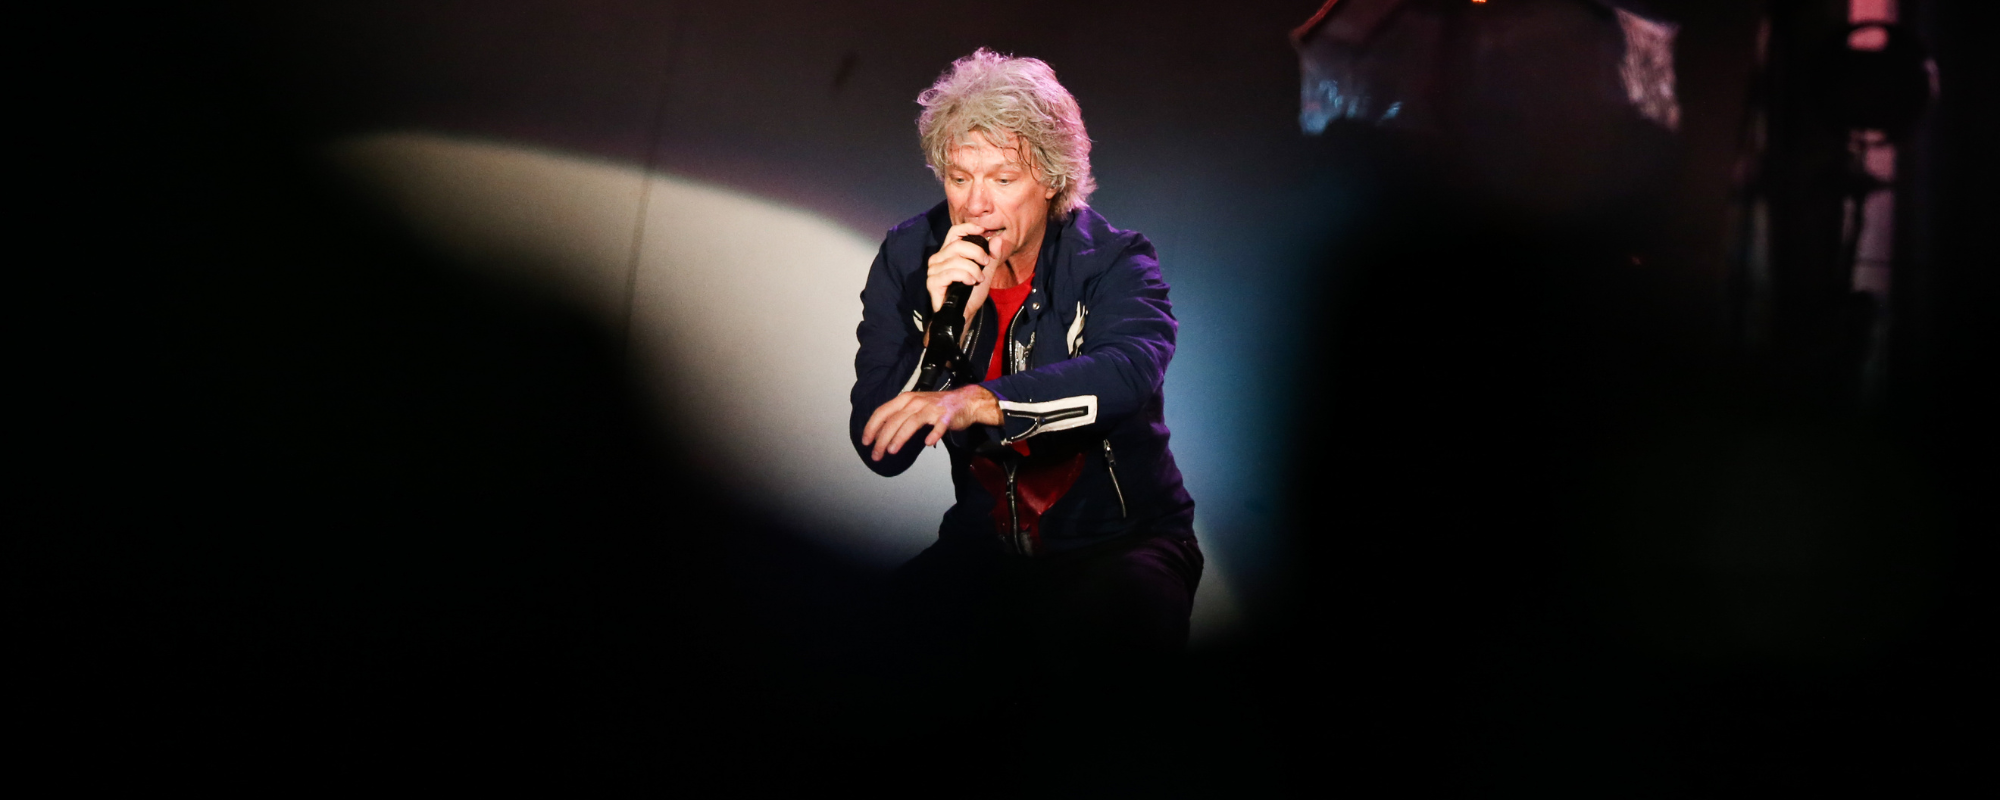 How the Meaning Behind Bon Jovi’s “American Reckoning” Divided Some Fans